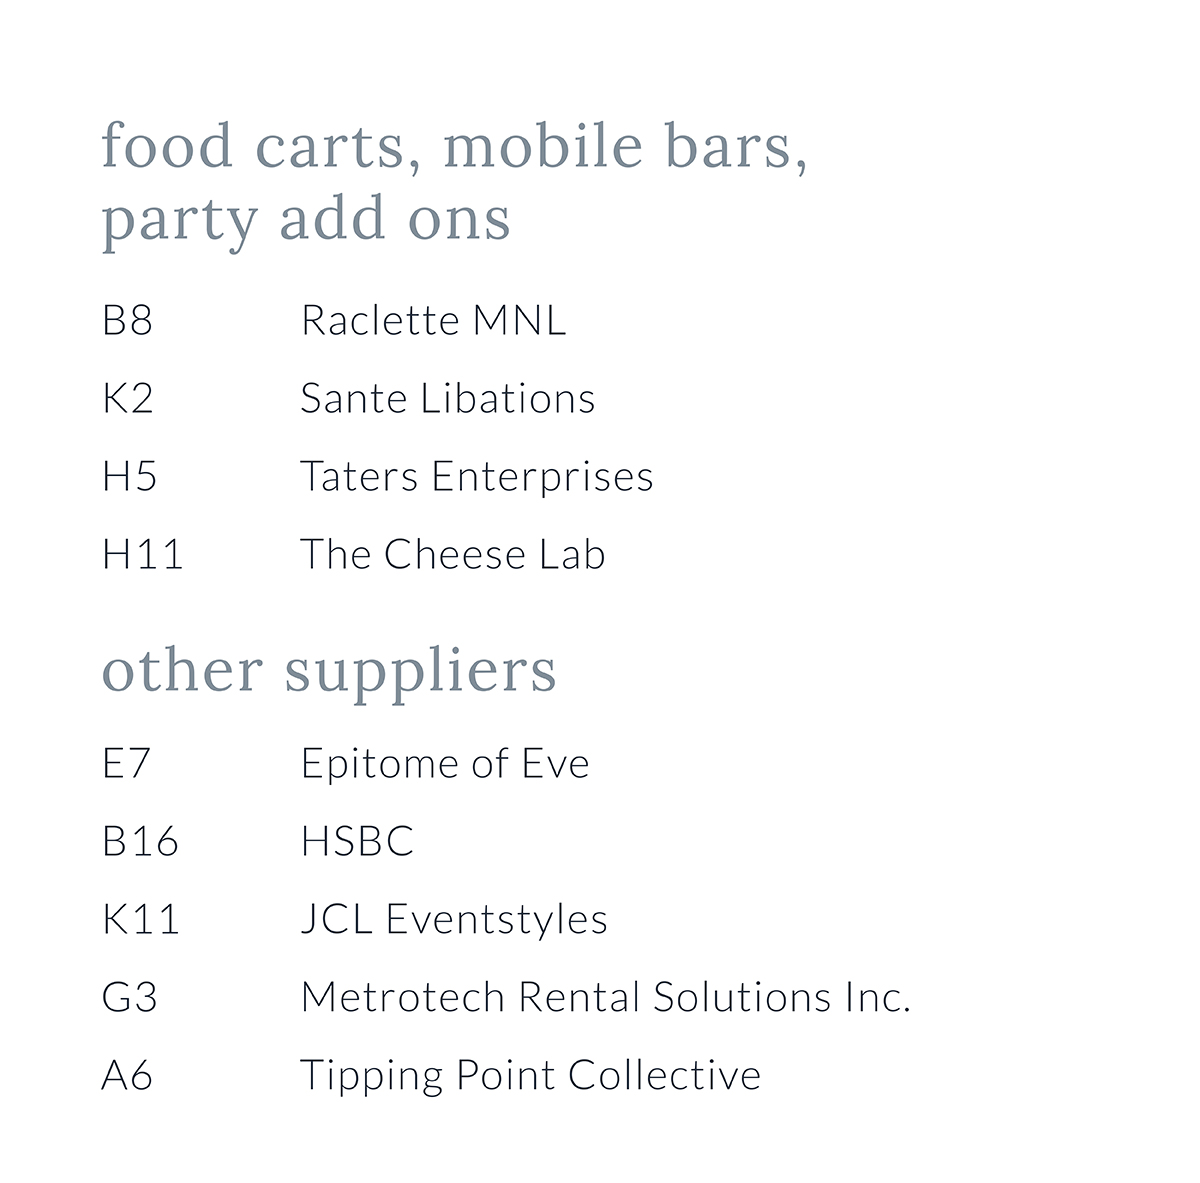 Raclette MNL, Sante Libations, Taters Enterprises, The Cheese Lab, Epitome of Eve, HSBC, JCL Eventstyles, Metrotech Rental Solutions Inc., Tipping Point Collective